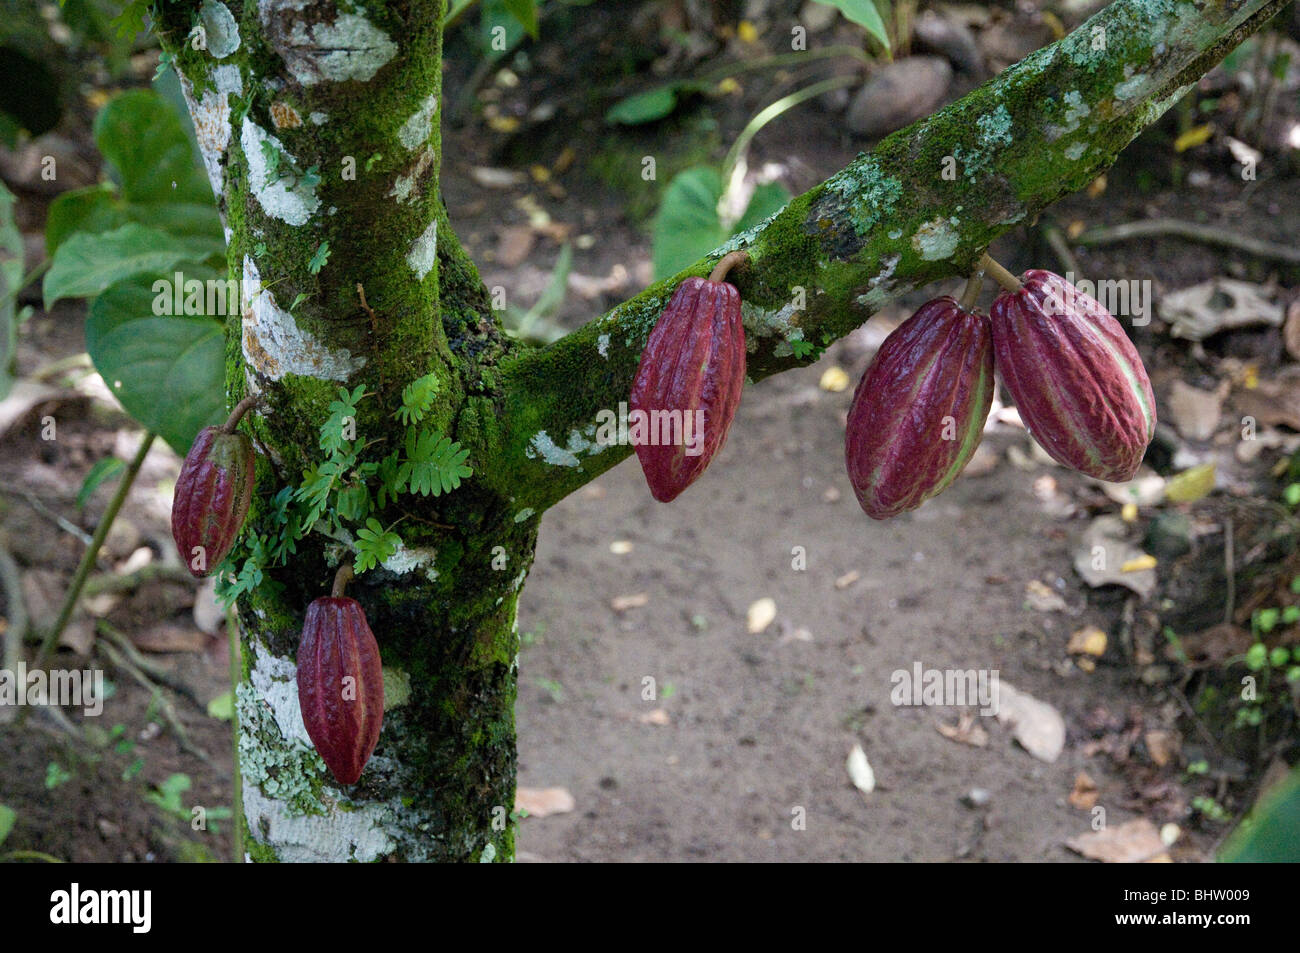 Hanging Cocoa pods growing on tree in St Lucia in tropical forest green moss and ferns also growing on bark Stock Photo